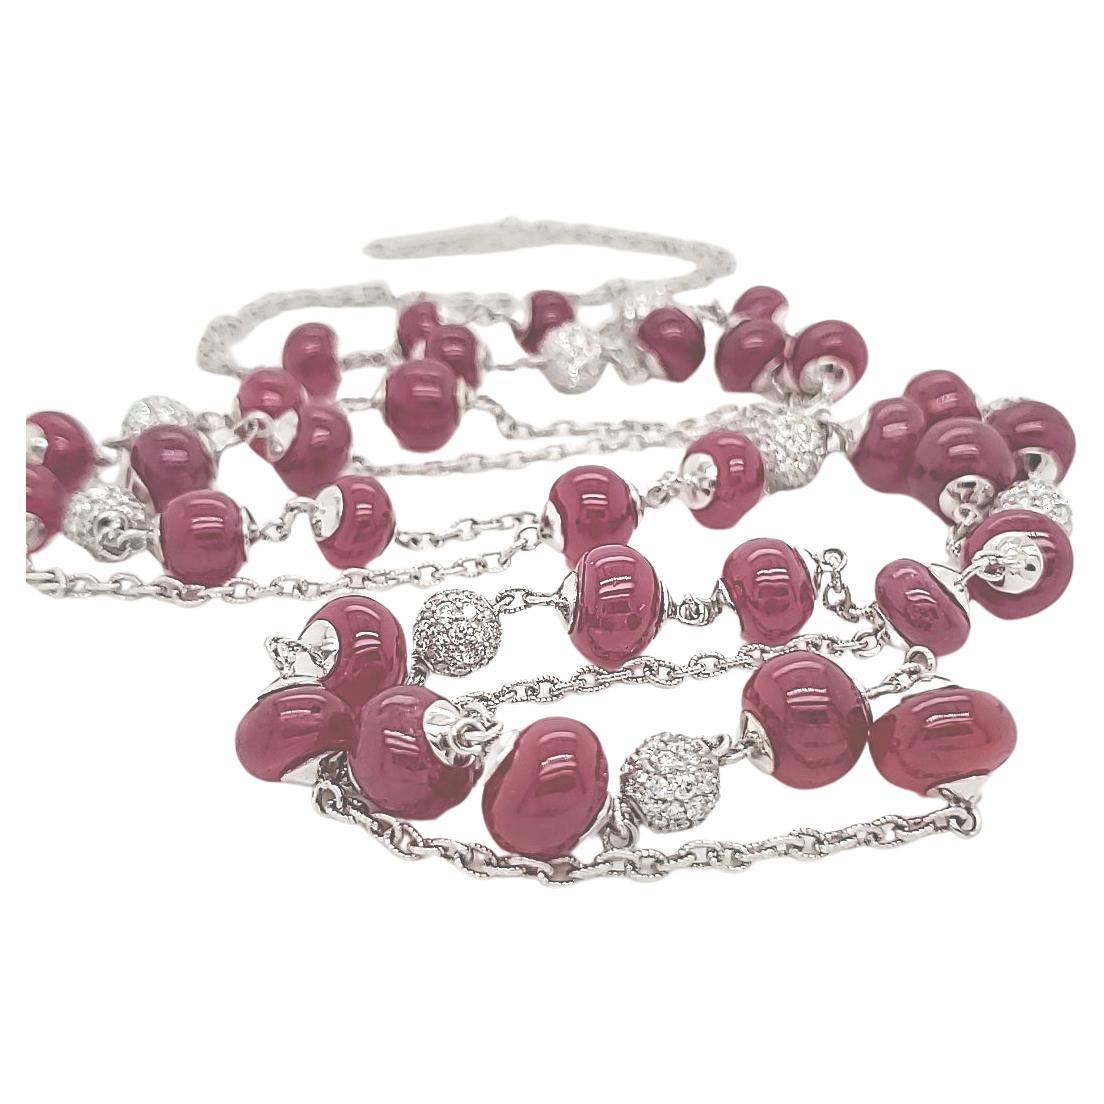 African Ruby Bead Necklace in 18k Gold Chain

Crafted with meticulous precision, this 98-mm necklace is a vision of refined luxury. 

Adorning its length are an astounding 3.31 carats of dazzling diamonds, they are a testament to the highest